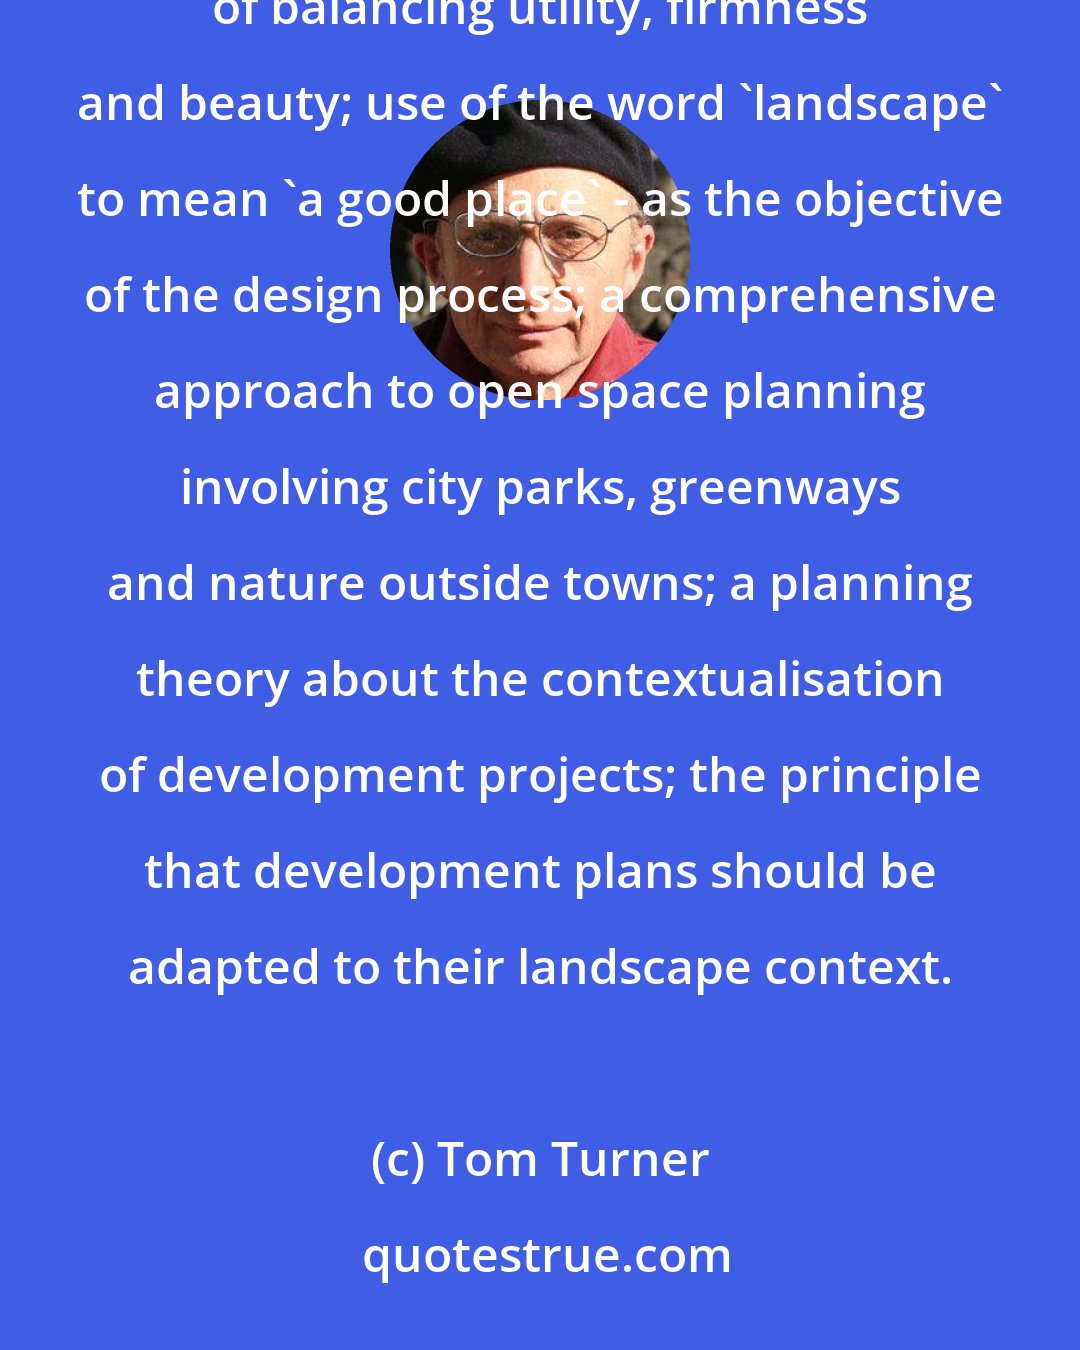 Tom Turner: The strengths landscape architecture draws from its garden design heritage include: the Vitruvian design tradition of balancing utility, firmness and beauty; use of the word 'landscape' to mean 'a good place' - as the objective of the design process; a comprehensive approach to open space planning involving city parks, greenways and nature outside towns; a planning theory about the contextualisation of development projects; the principle that development plans should be adapted to their landscape context.